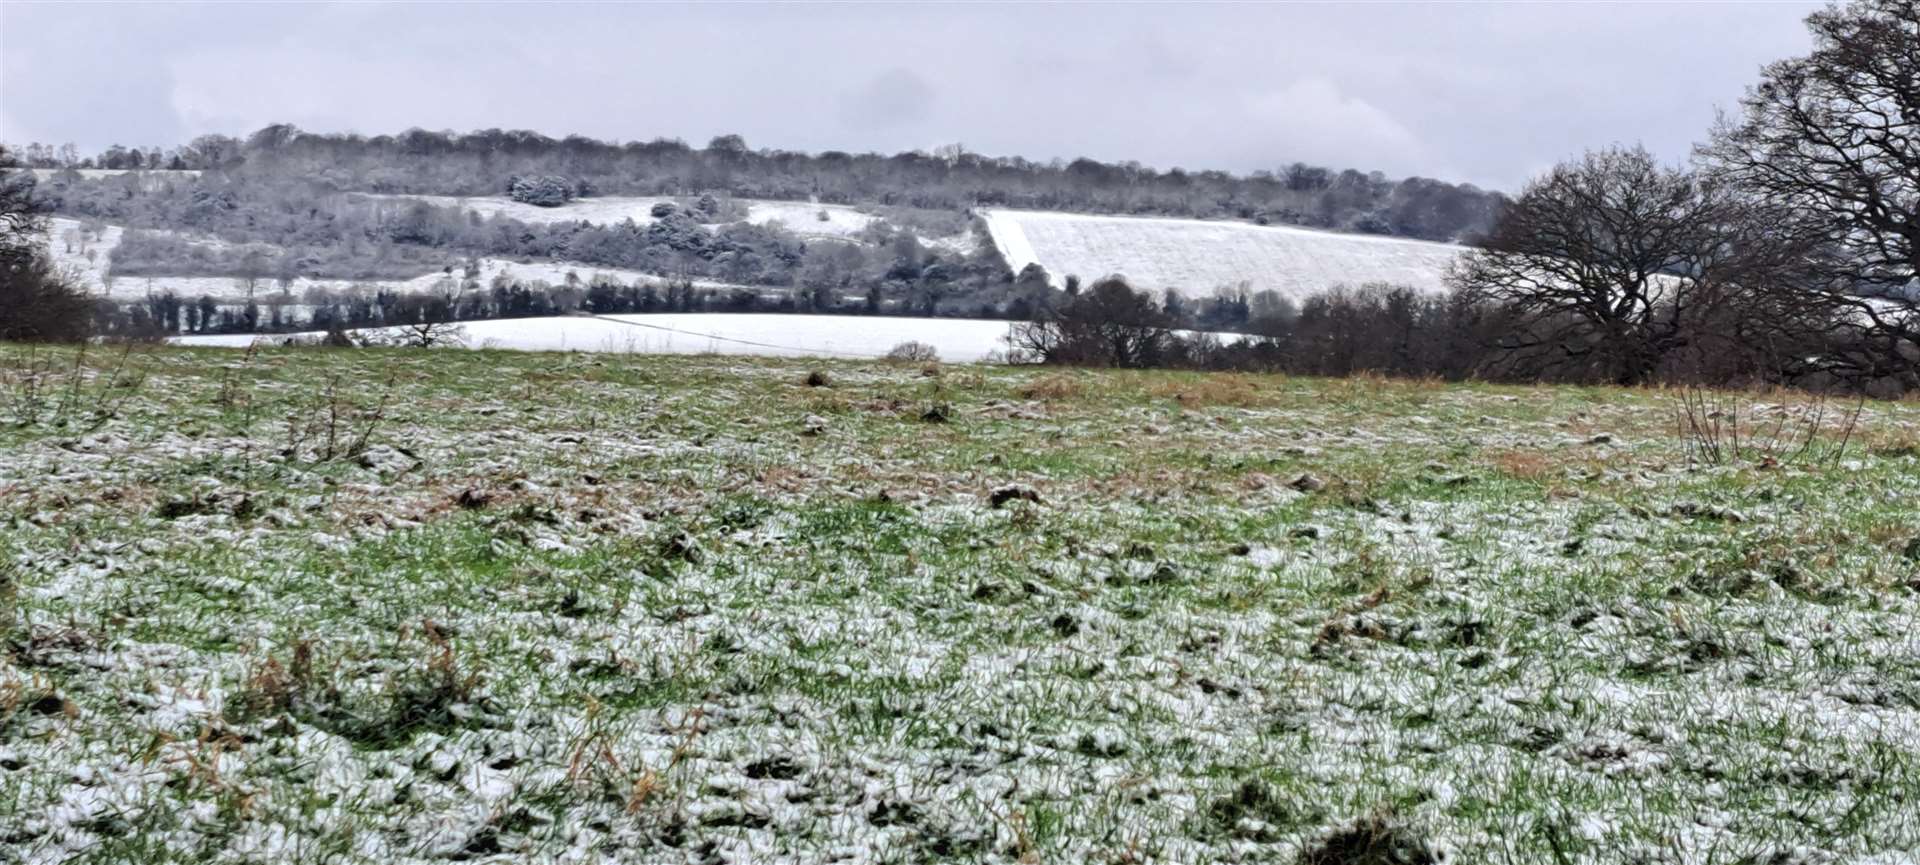 Snow in fields near West Malling, January 8, 2024. The hills are Birling Hill and the Pilgrims Way, overlooking Snodland and Birling